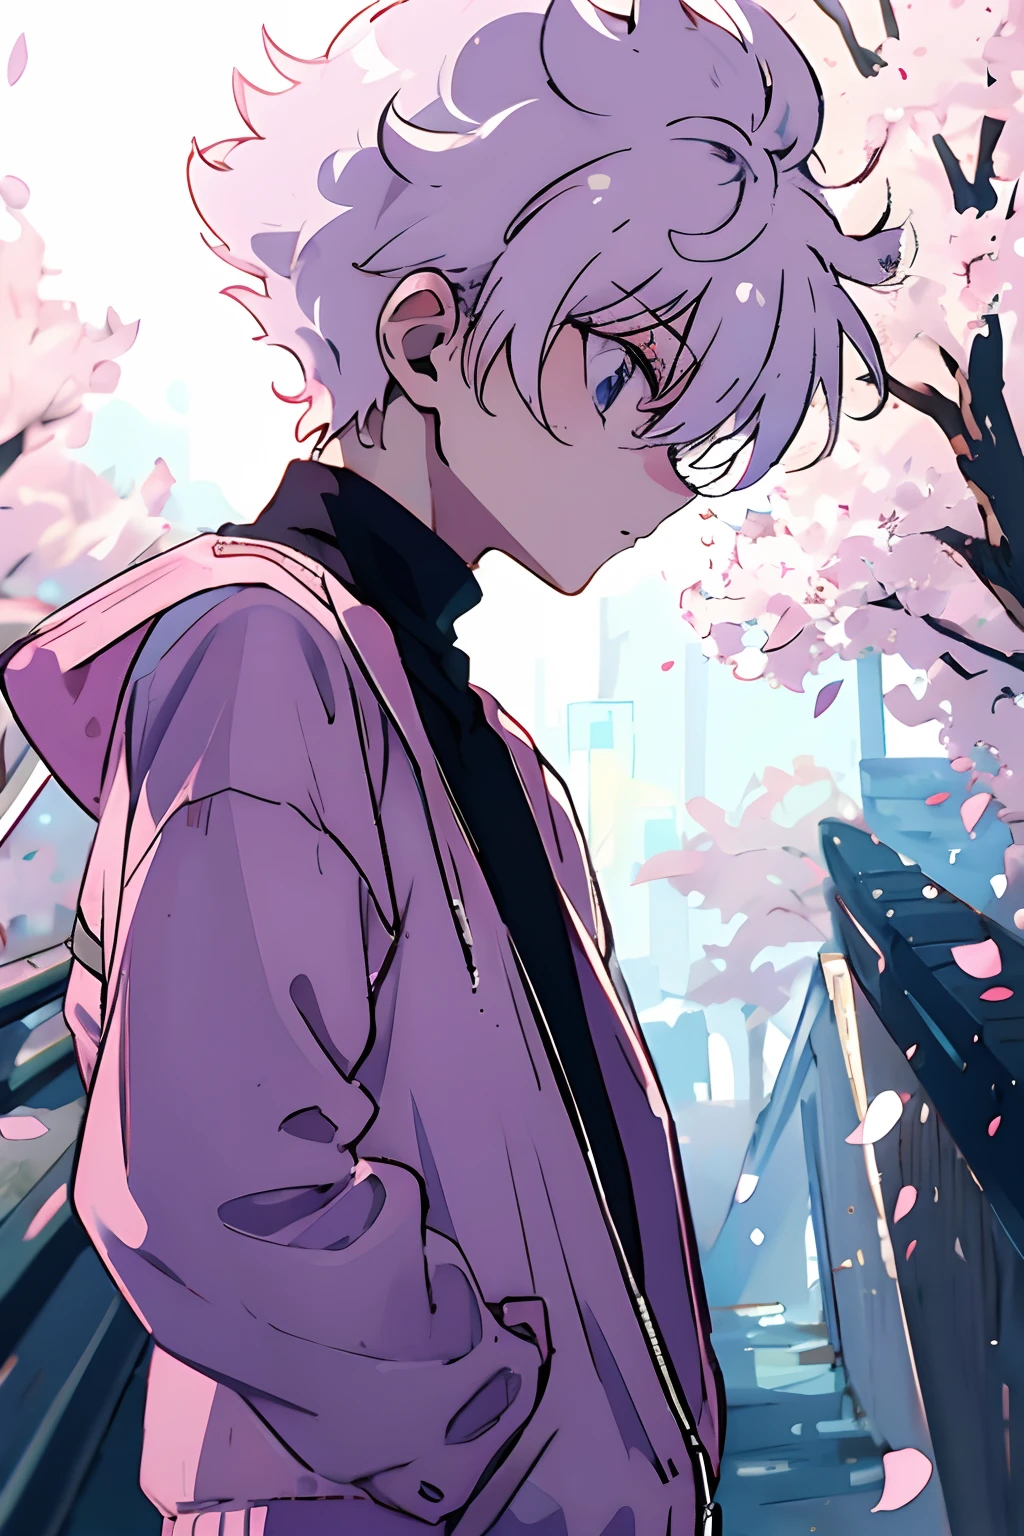 1boy, killua_zoldyck, solo, focus, teen, walking, looking down, worried, pink jacket, white shirt, shorts, upper body, from side, small town, soft light, looking at viewer